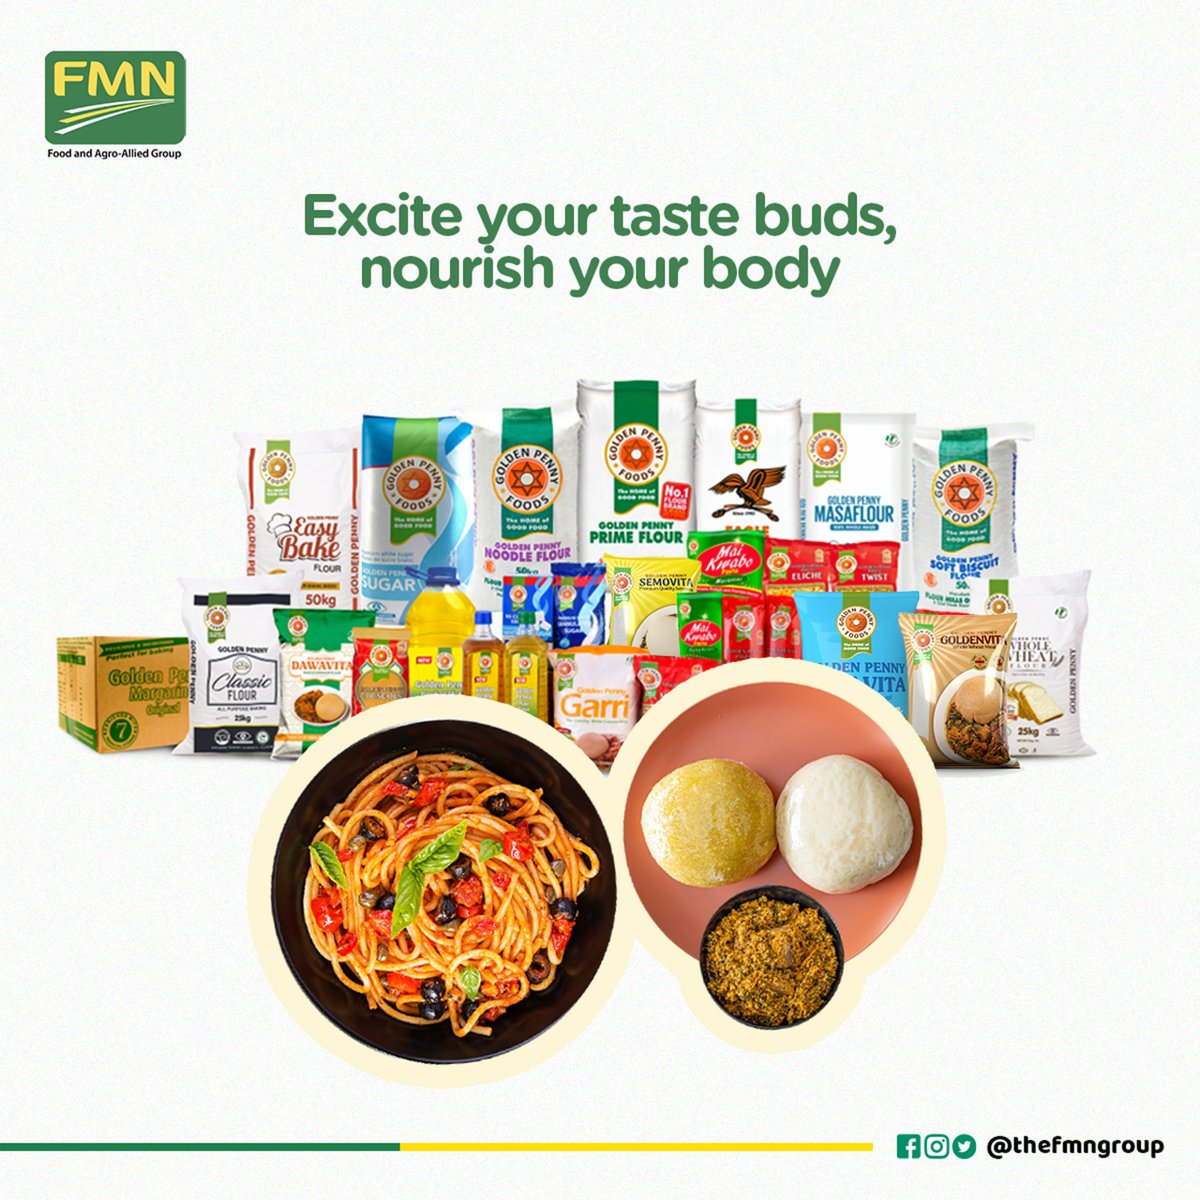 Your body craves the goodness of wholesome, delightful meals. 

Let our Golden Penny range of products be your trusted companion for tasty and nutritious meals.

#FMN #Healthymeals